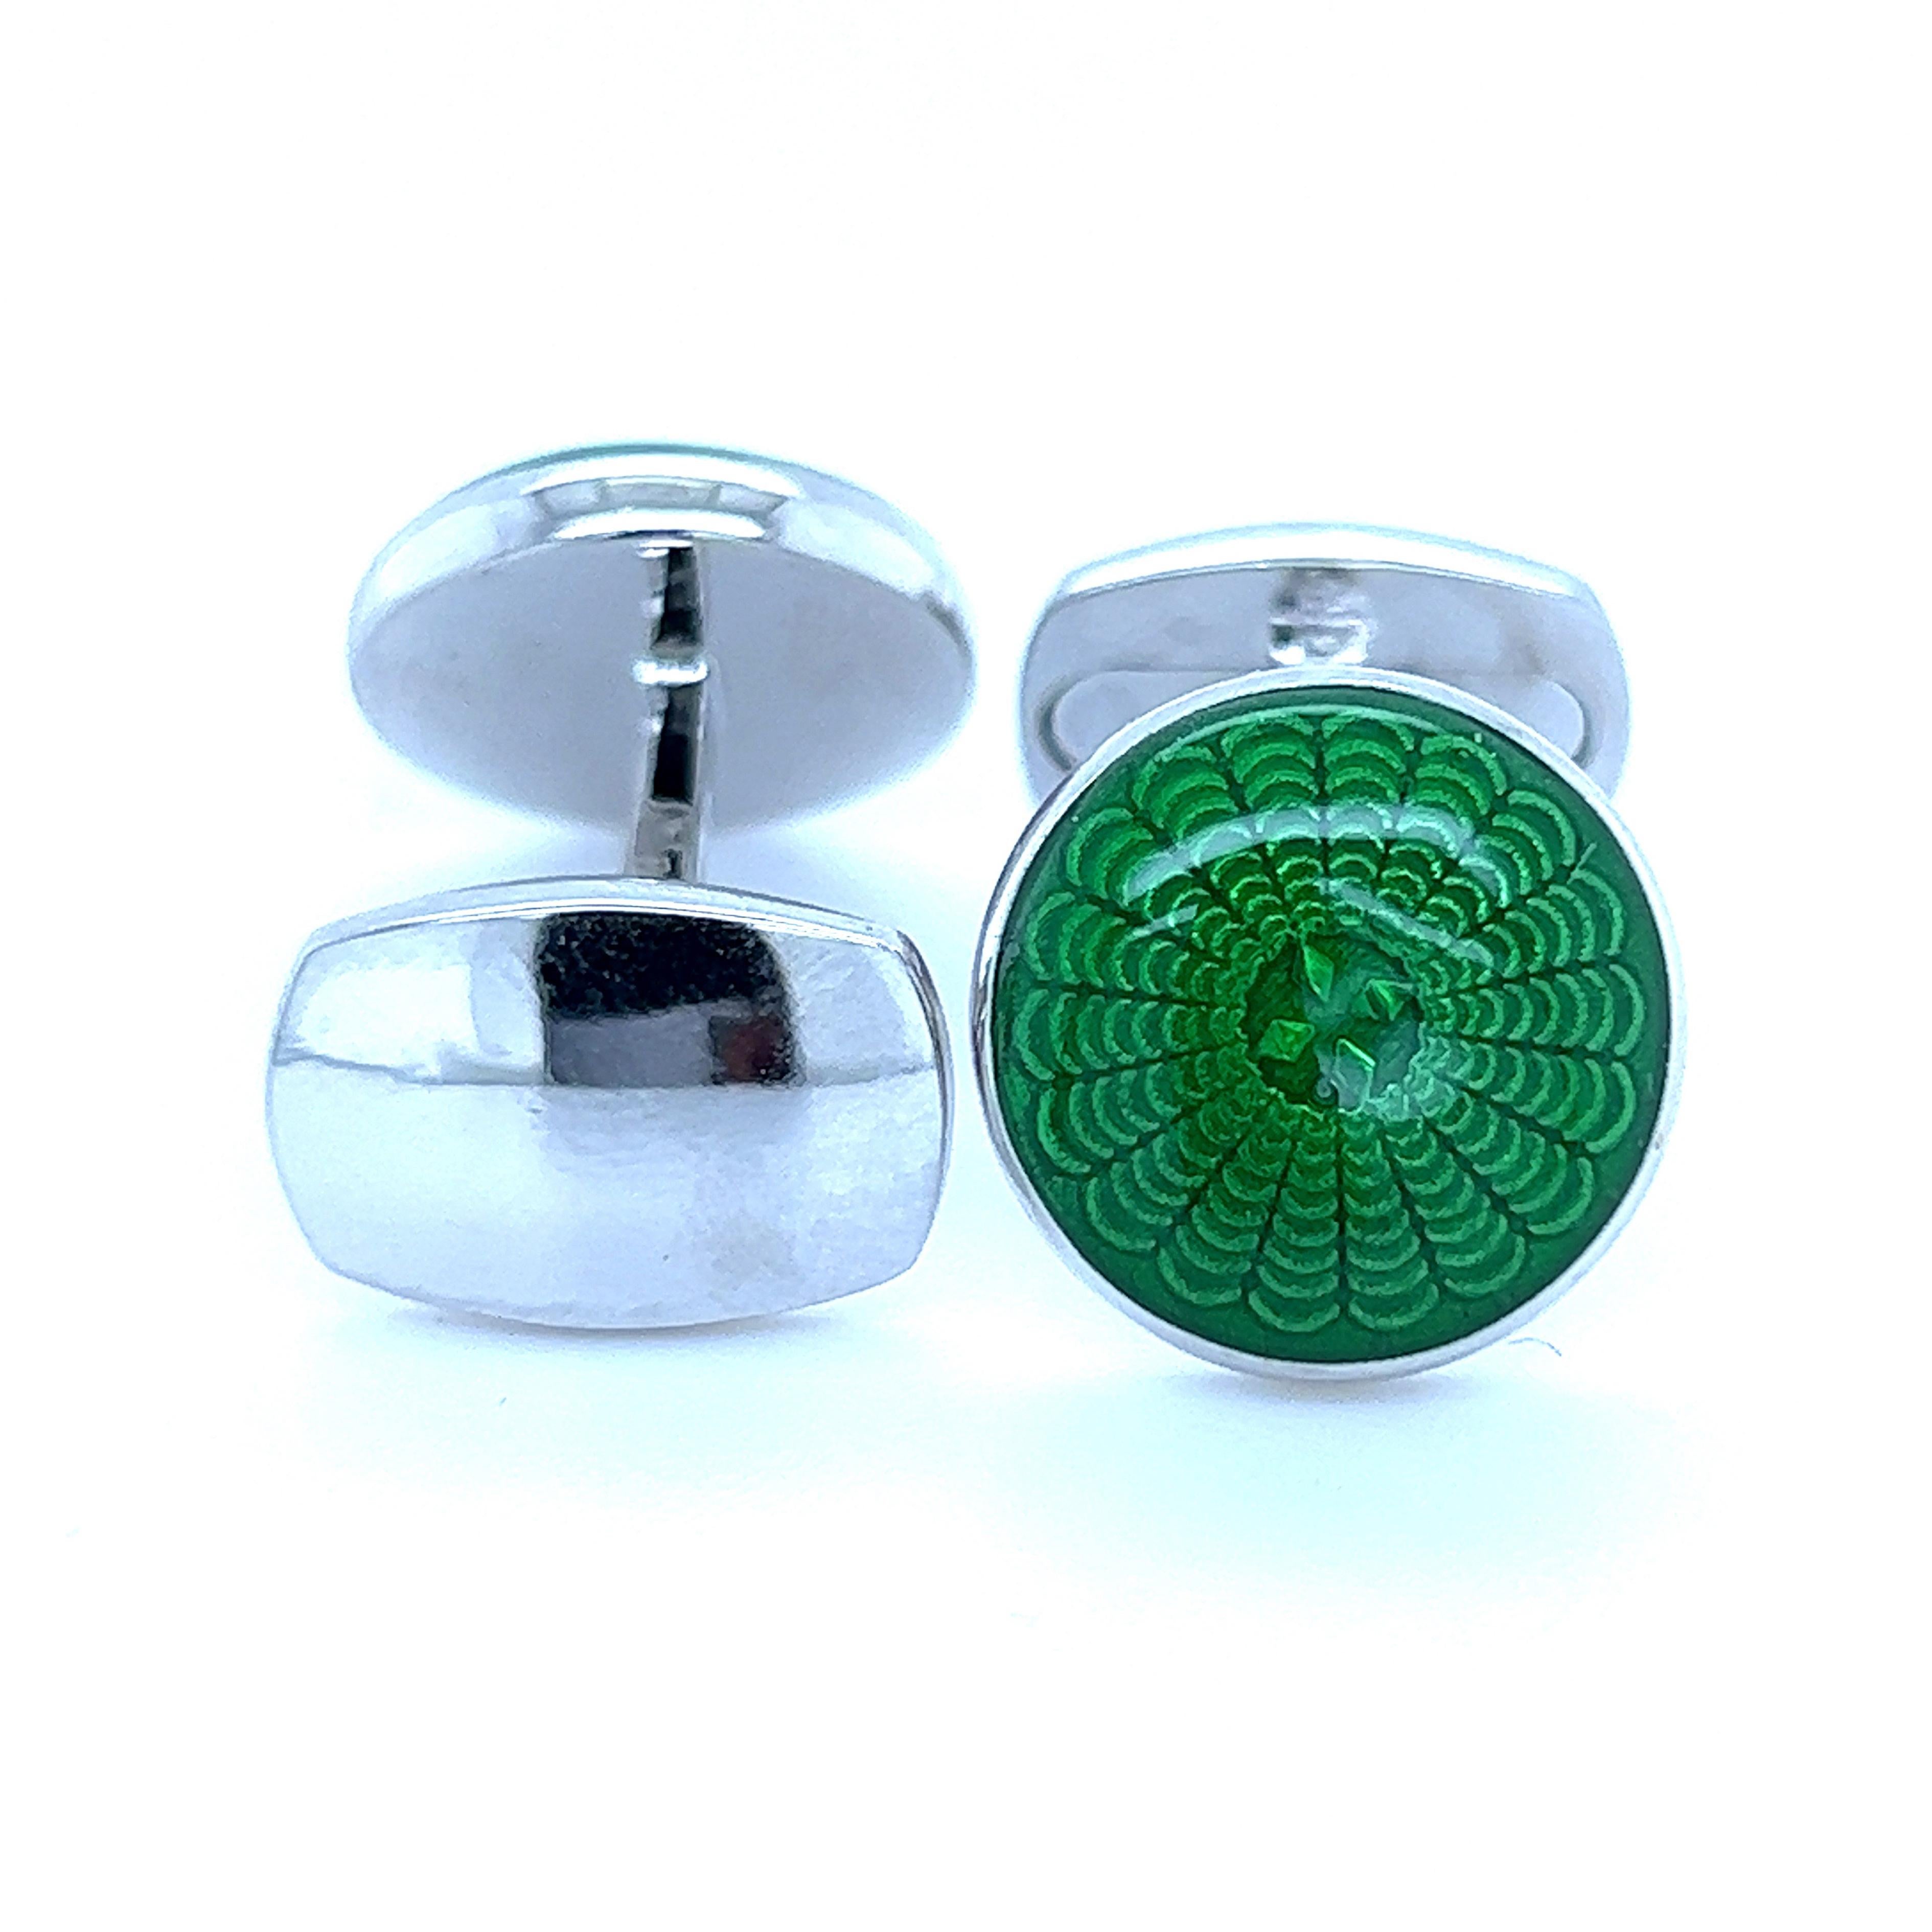 Chic yet Timeless, Unique yet Classic, Vivid Green Hand Enameled with the antique Champlevé Technique Round Sterling Silver Cufflinks.

In our Smart Tobacco Suede Leather Case and Pouch